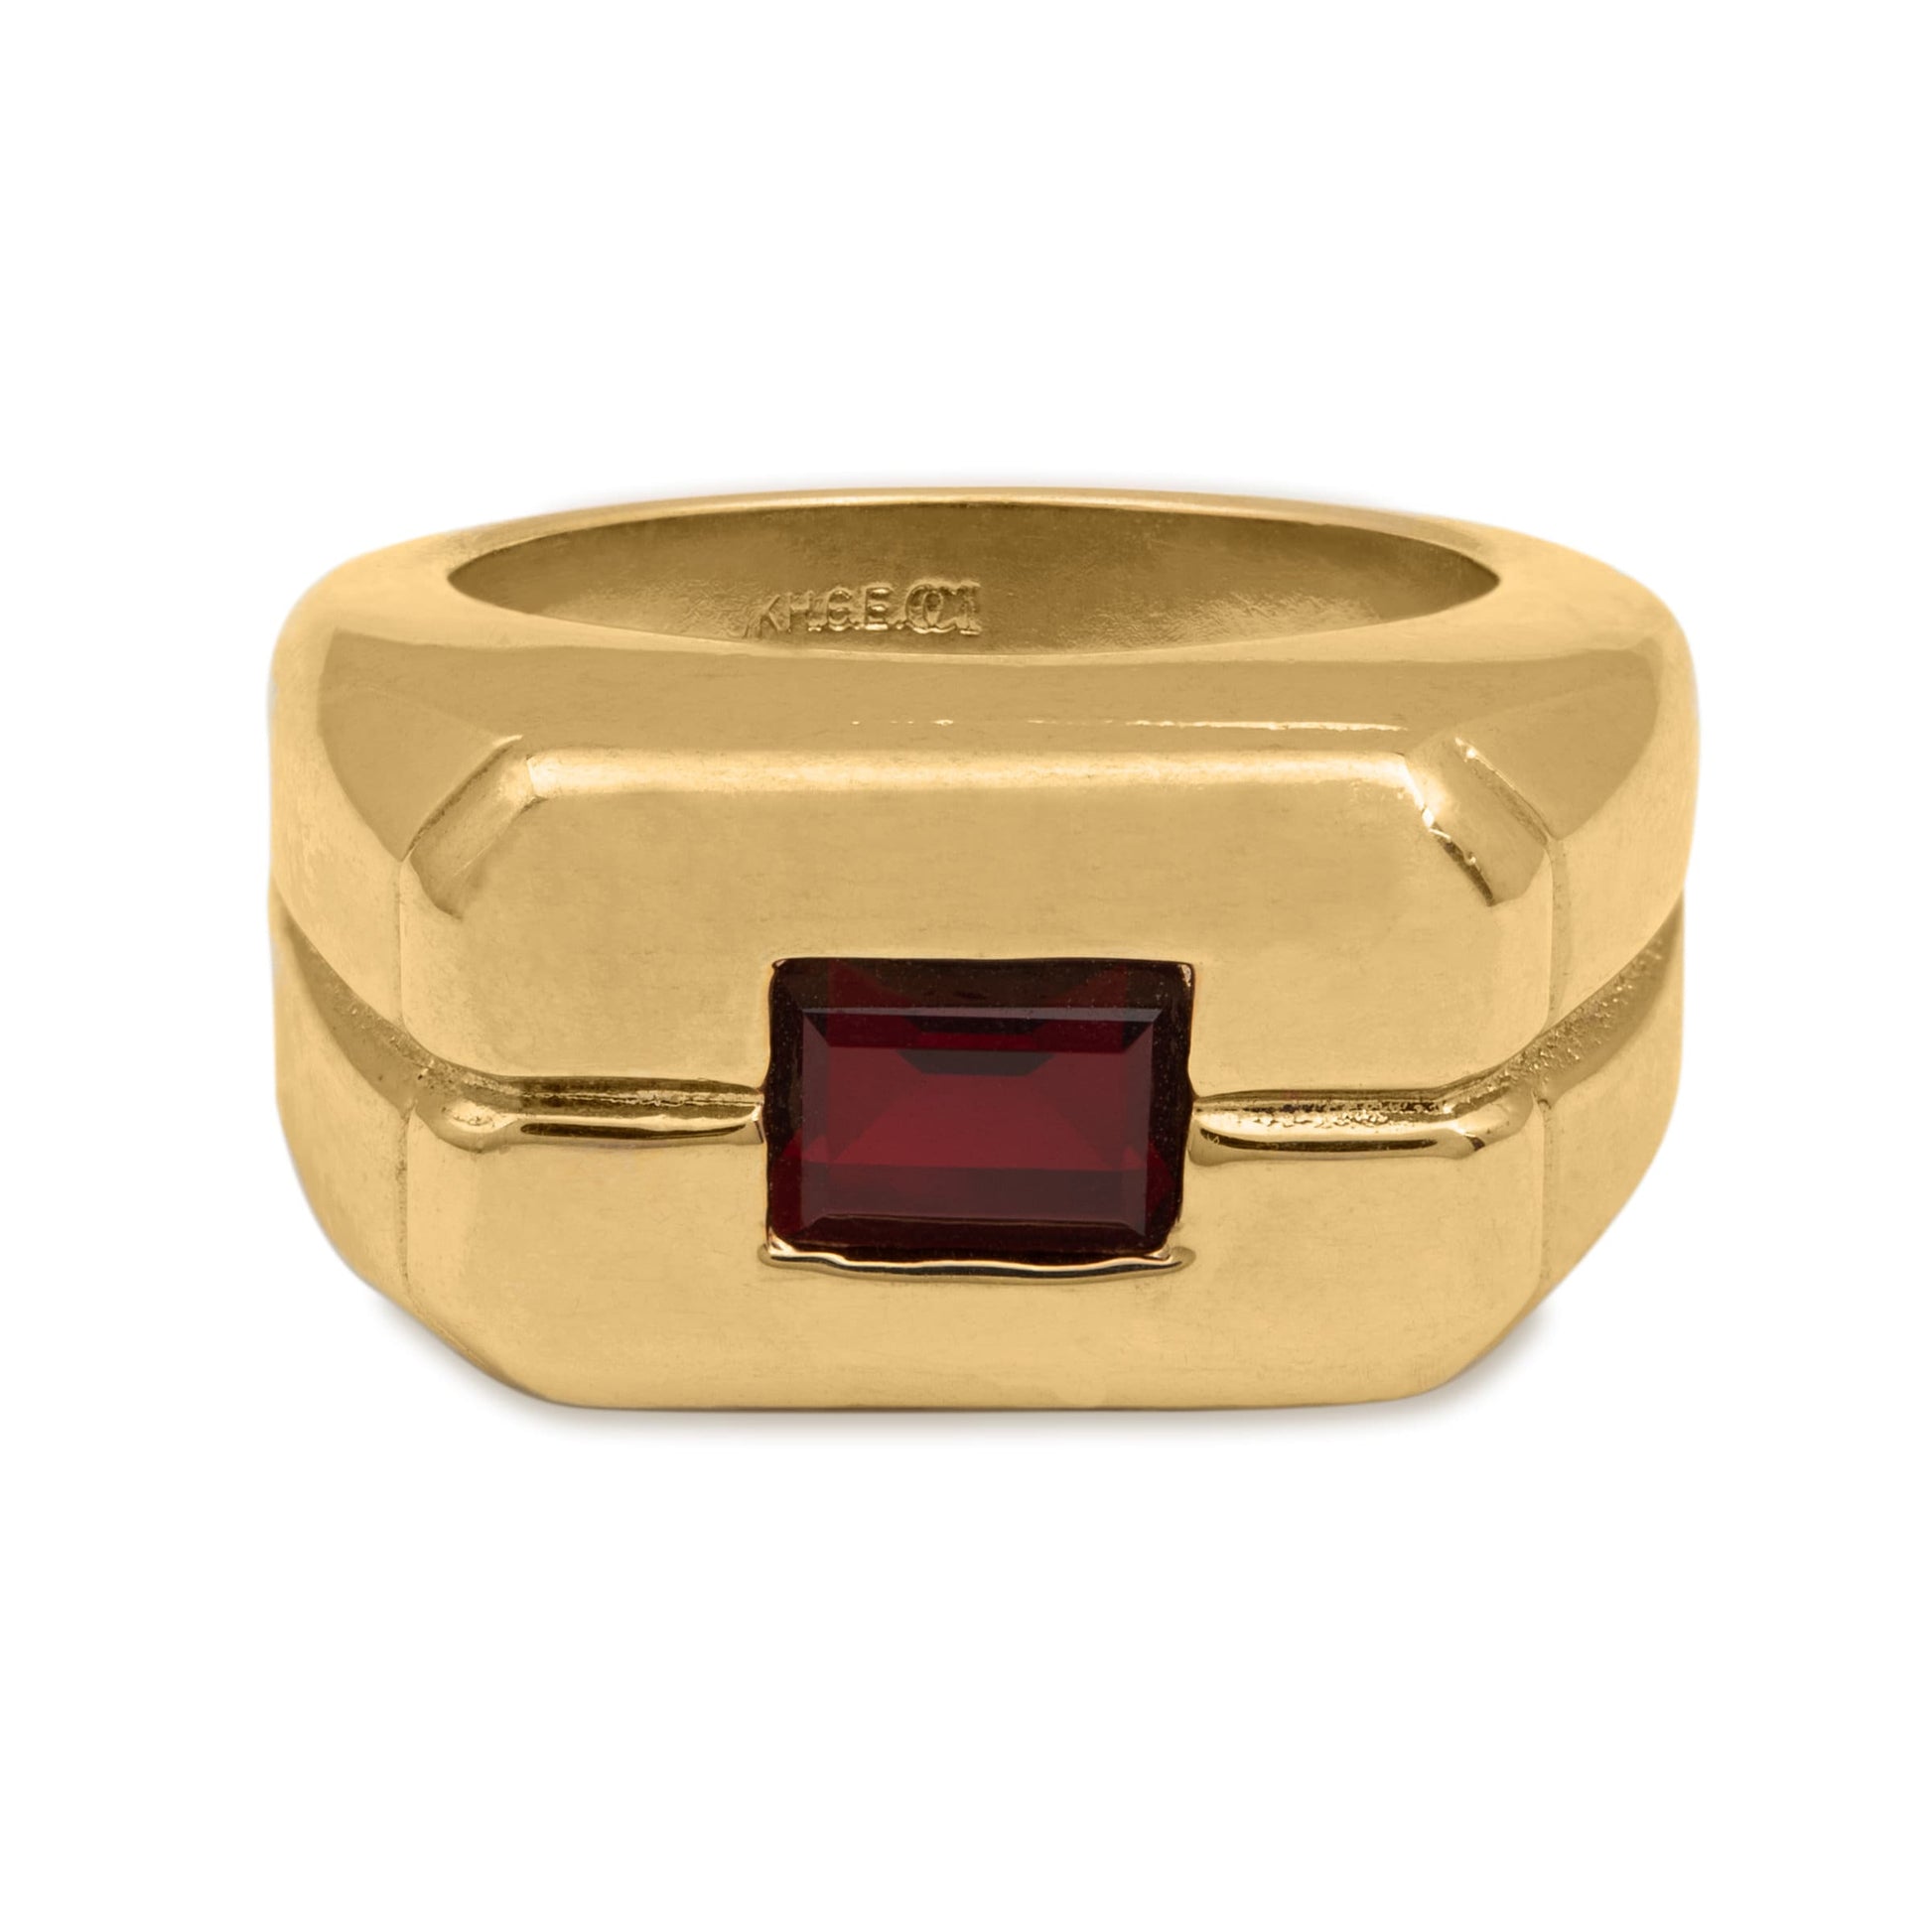 Vintage Ring 1980s Mens Ruby Crystal 18kt Gold Plated Ring Antique Mens Jewelry #R6002-RY - Limited Stock - Never Worn